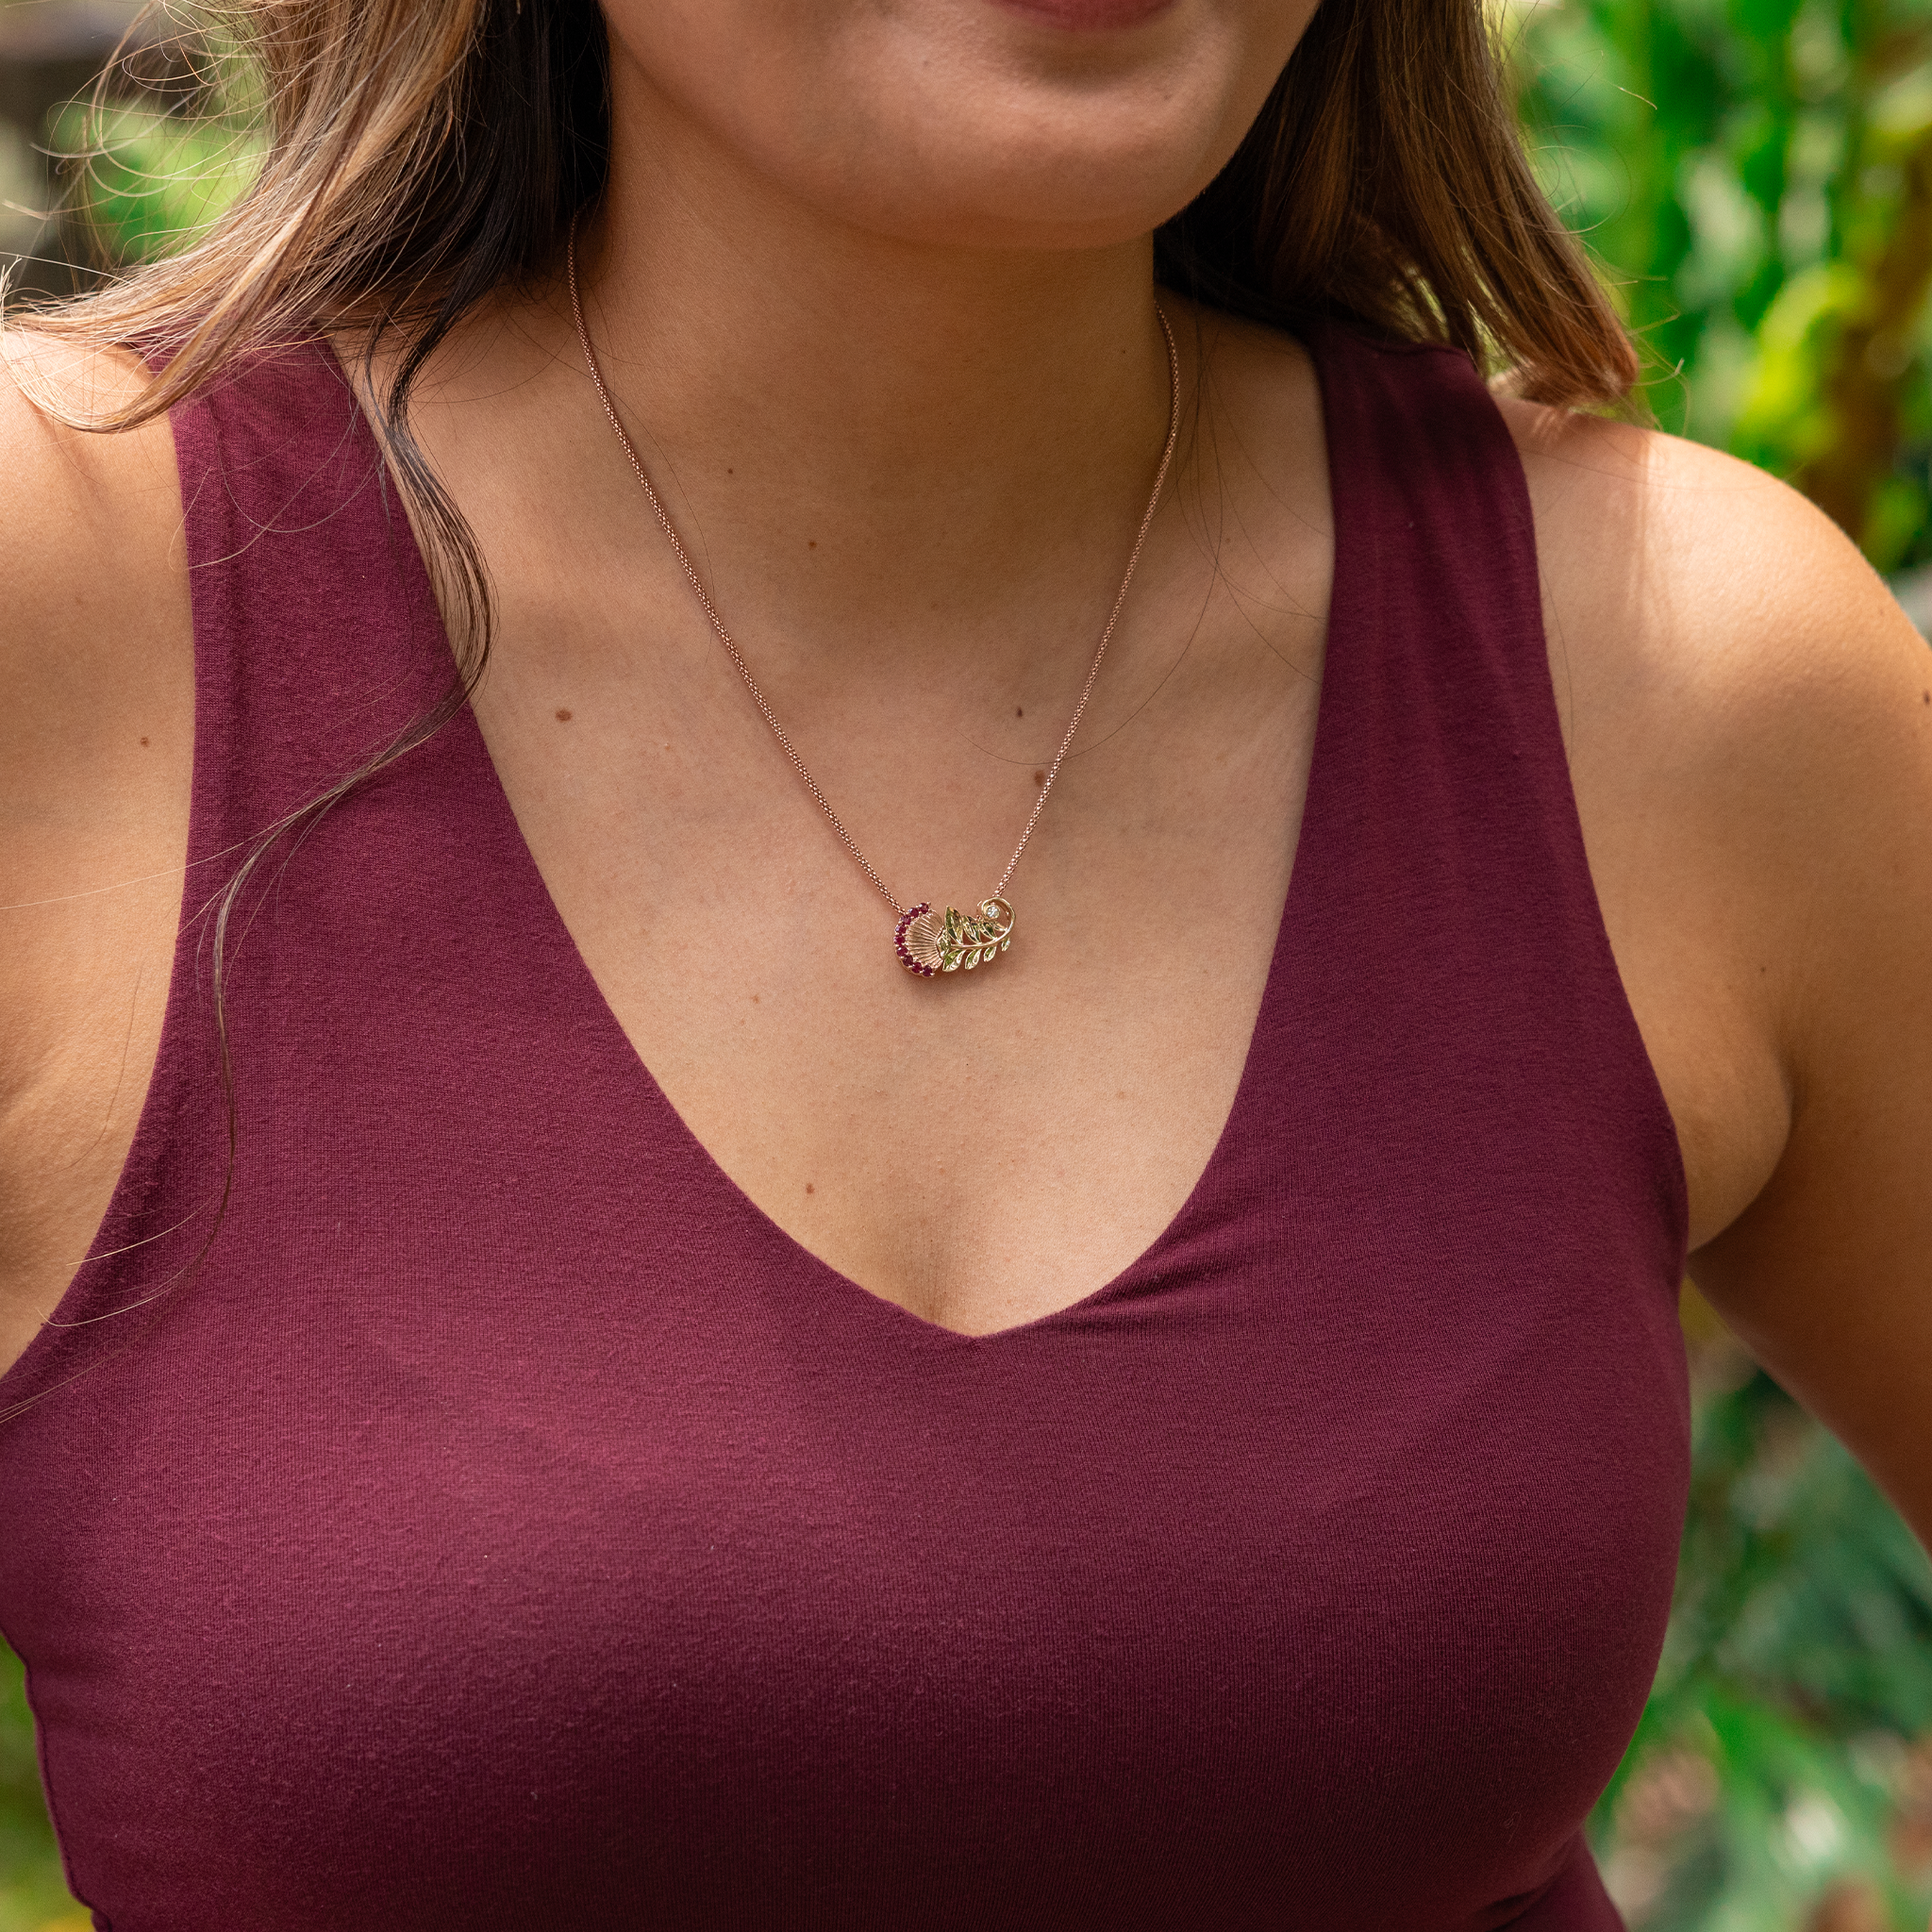 ʻŌhiʻa Lehua Ruby Pendant in Two Tone Gold with Diamonds - 24mm